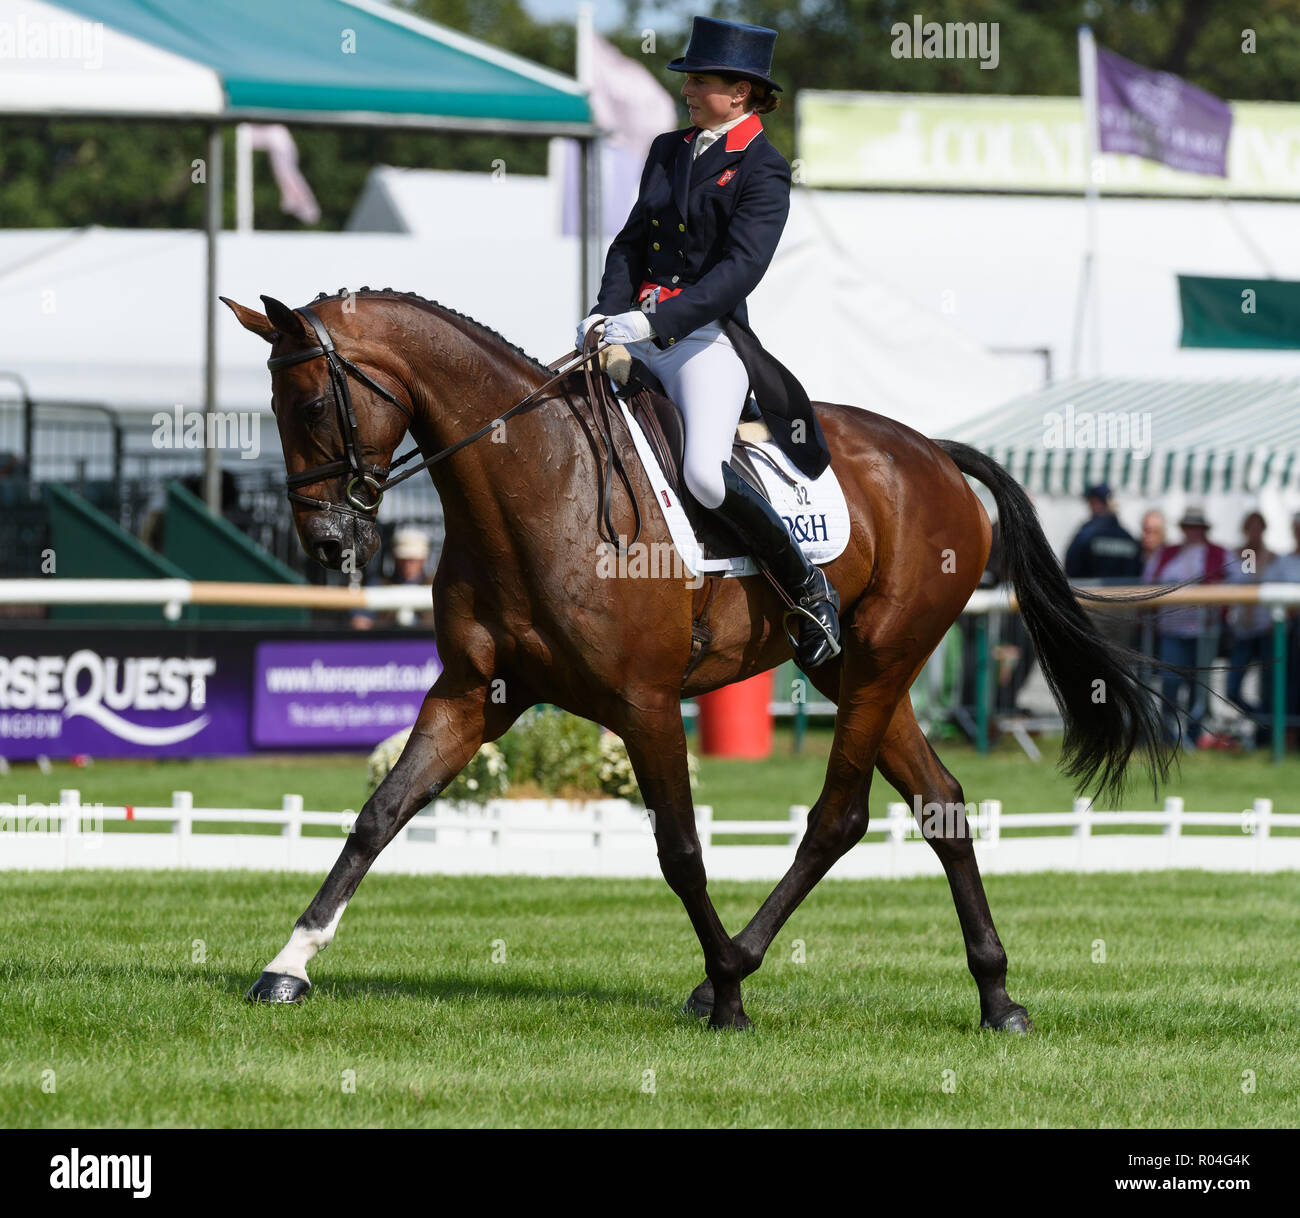 Piggy French and VANIR KAMIRA during the dressage phase of the Land Rover Burghley Horse Trials, 2018 Stock Photo